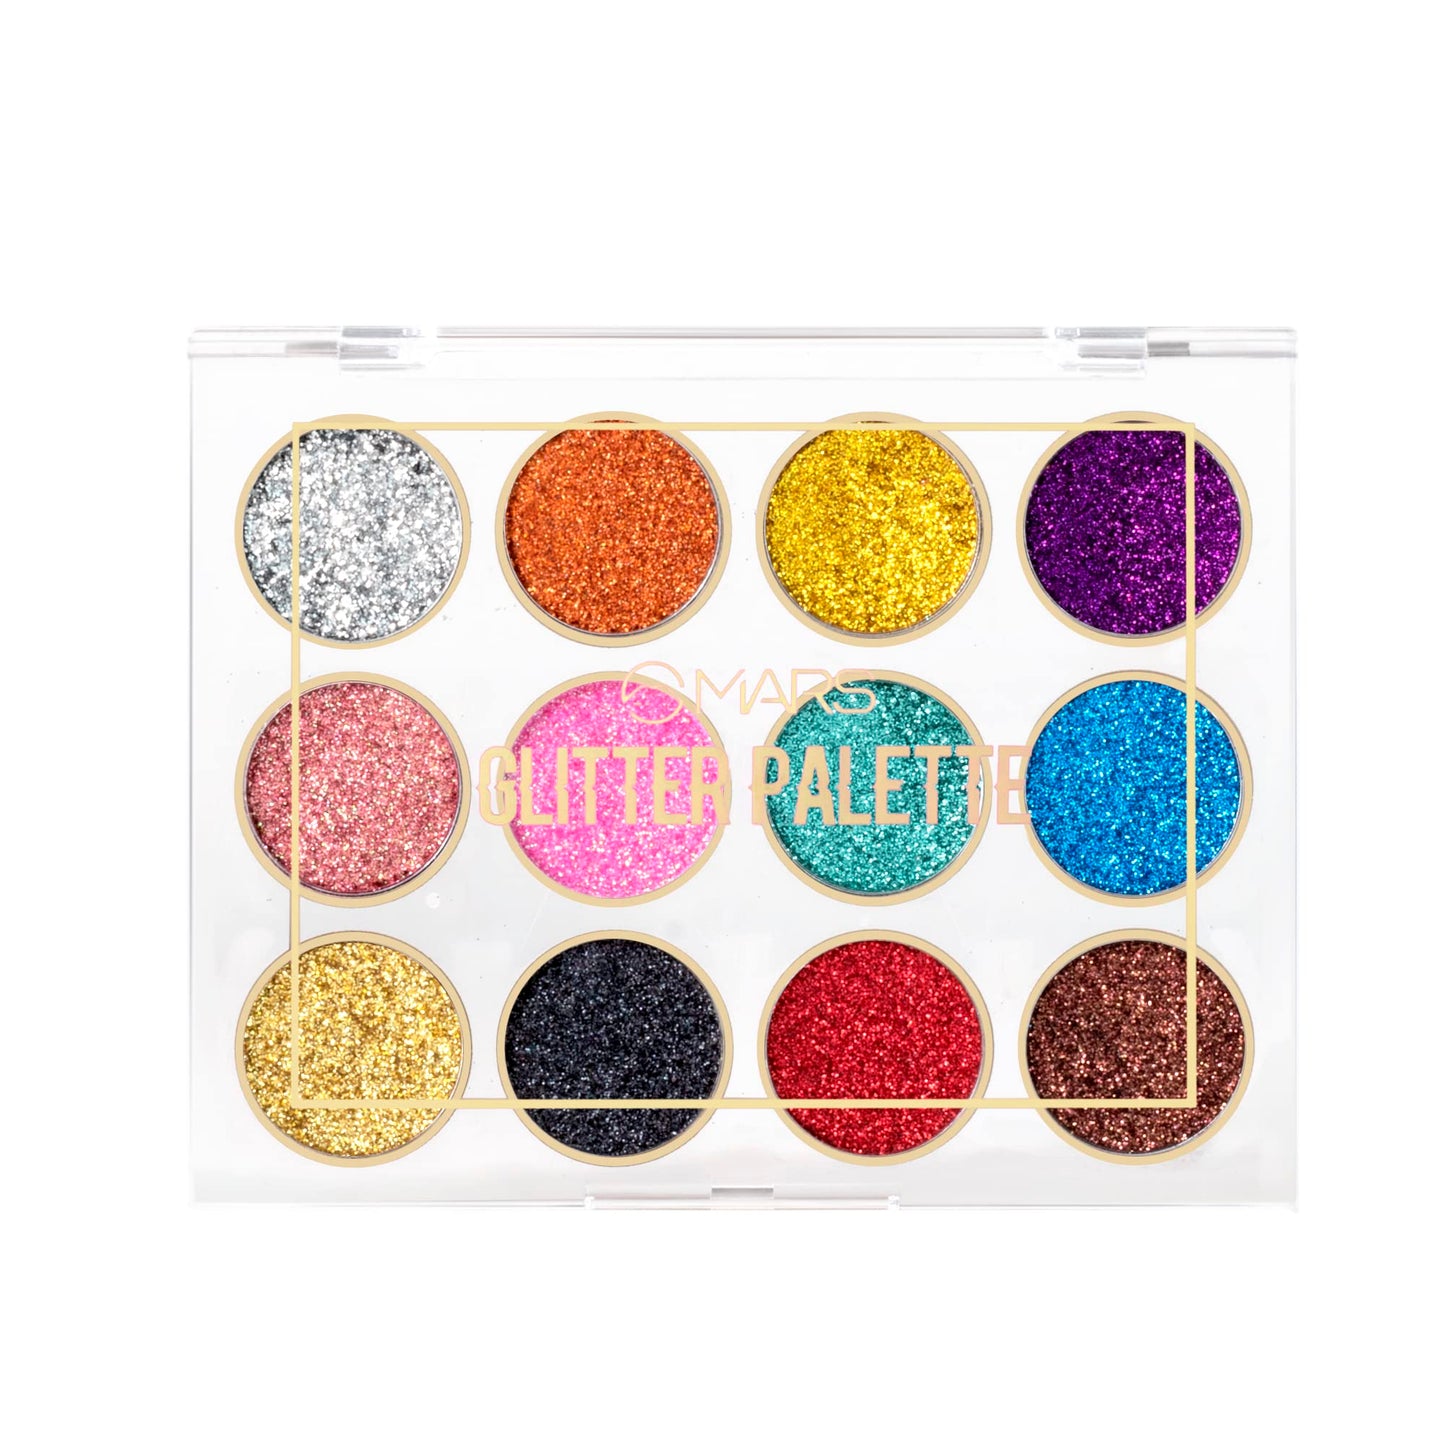 MARS 12 Shade Ultra Pigmented Glitter High Shine Eyeshadow Palette 12 g (Shade-01) | Long wearing and Easily Blendable Eye makeup Palette